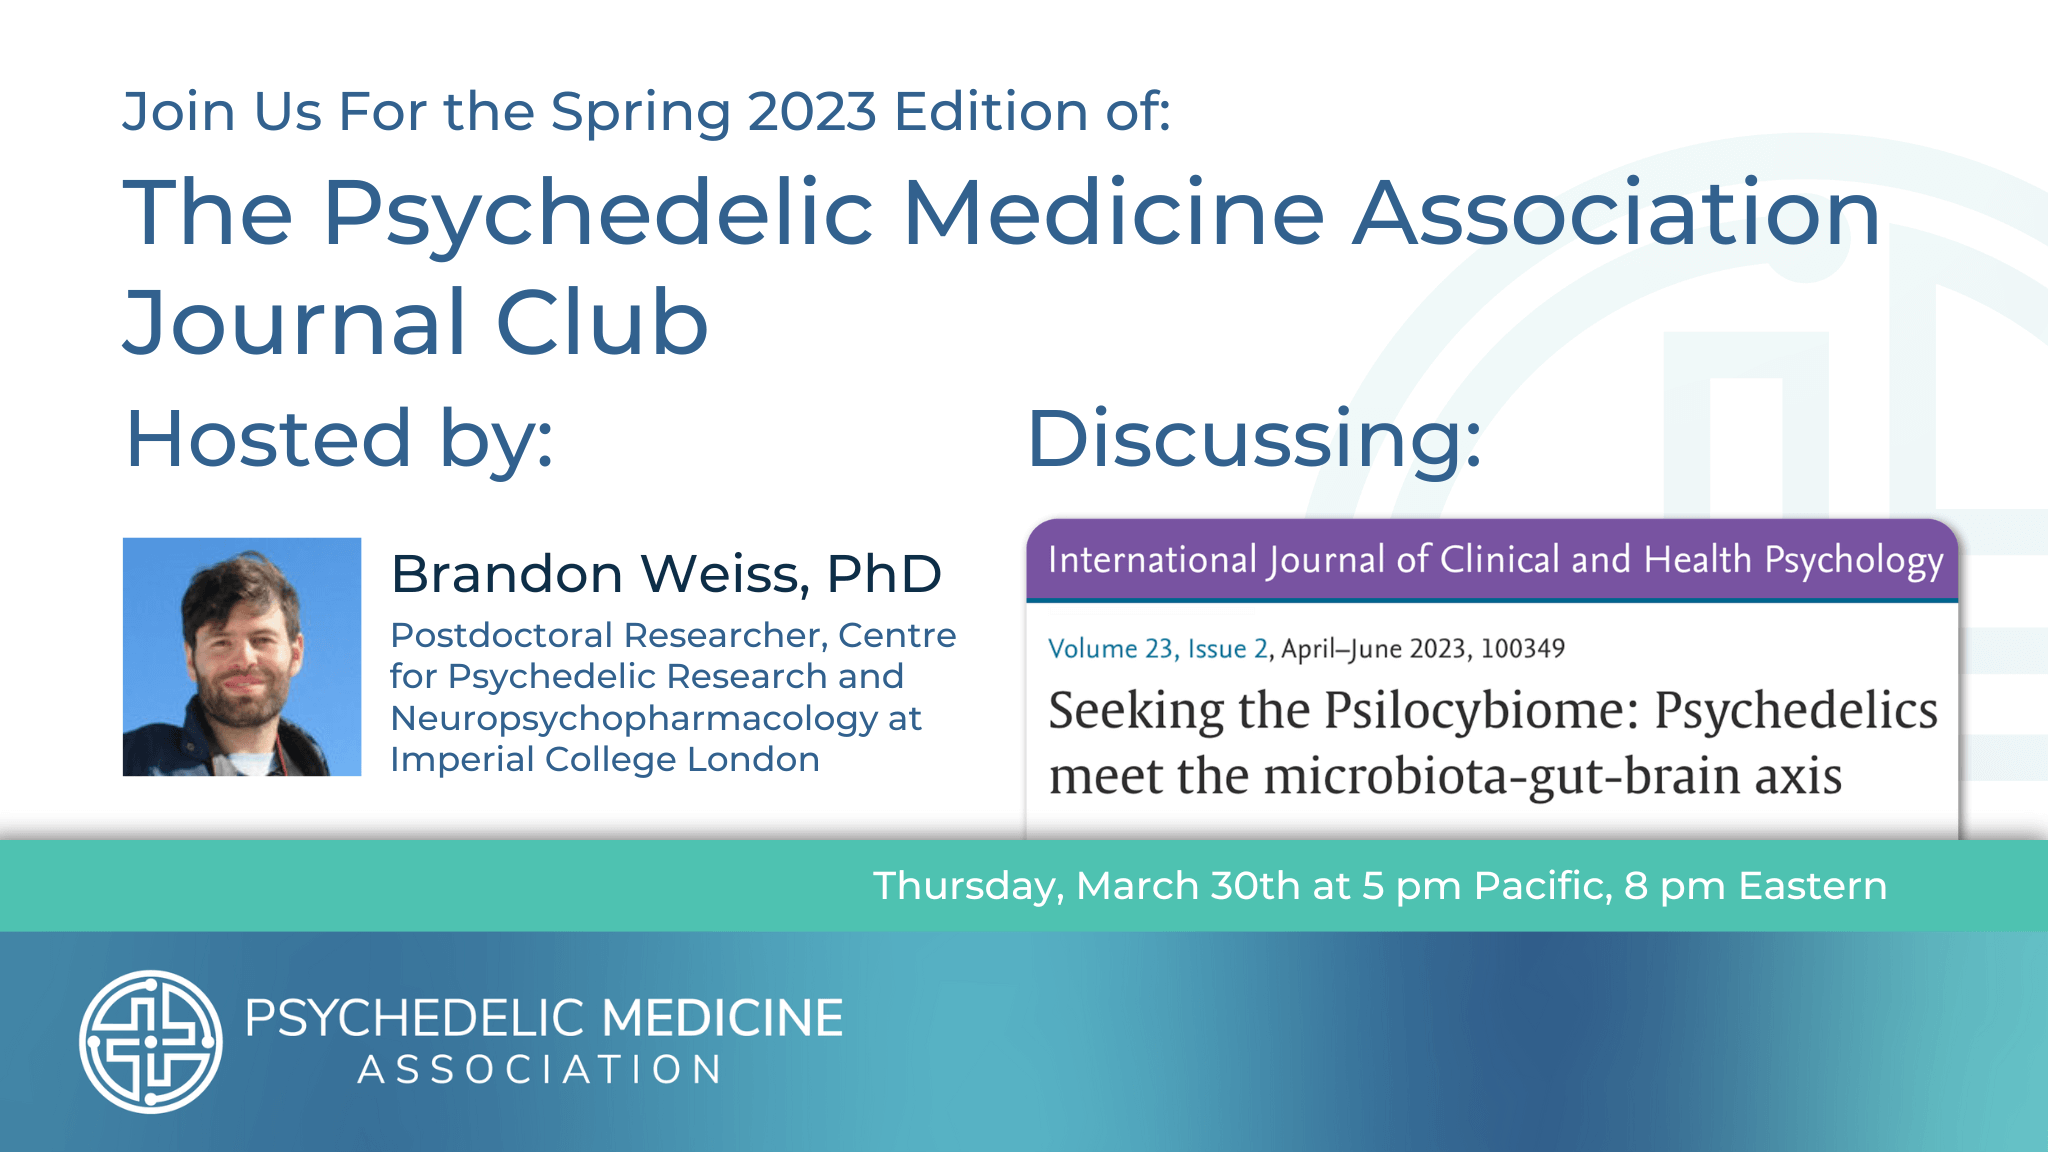 The Spring 2023 Edition of the Psychedelic Medicine Association Journal Club, hosted by Brandon Weiss, PhD - reading Seeking the Psilocybiome: Psychedelics meet the microbiota-gut-brain axis